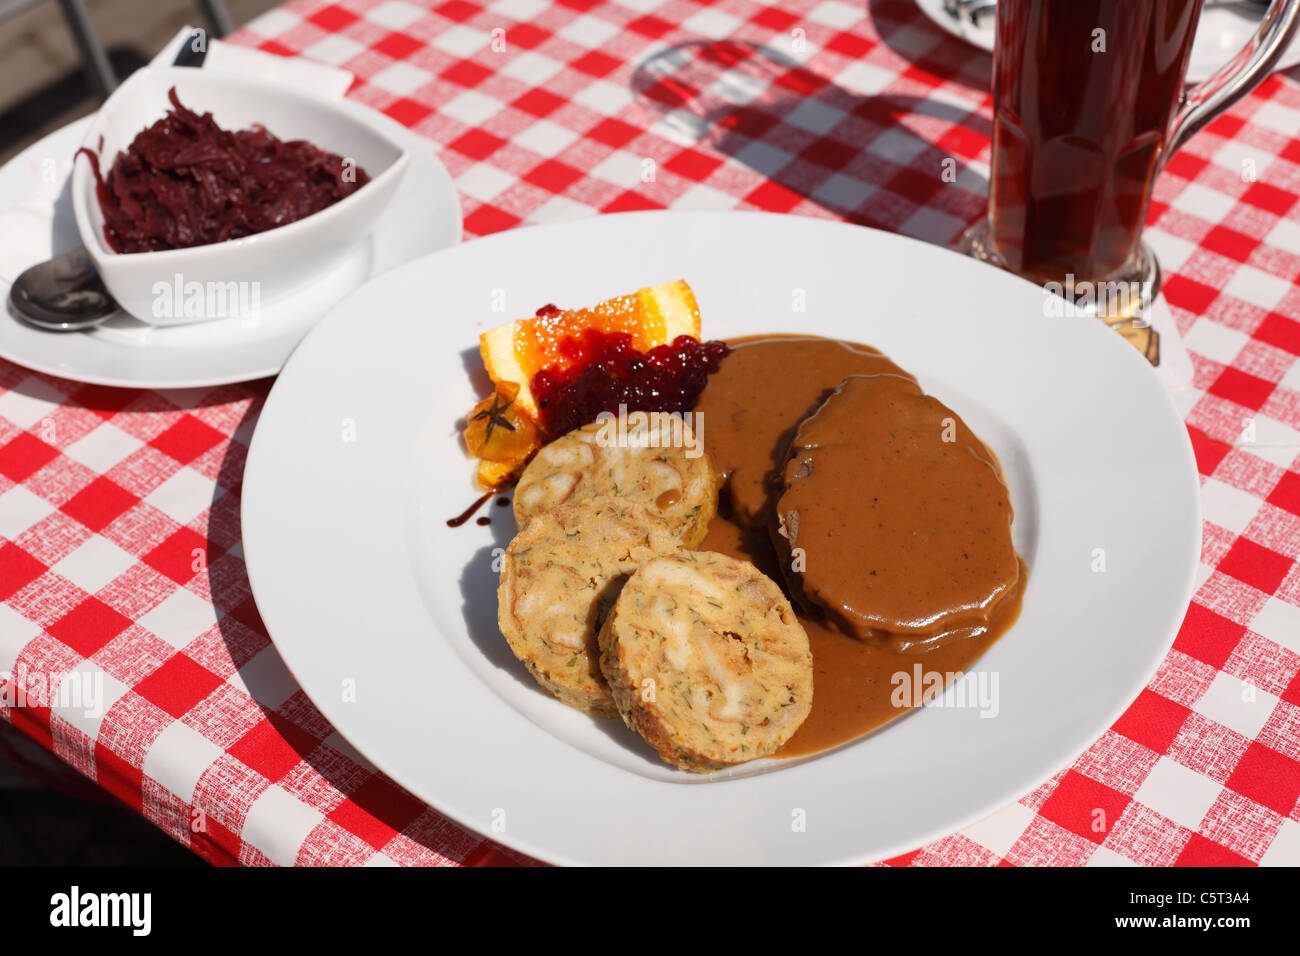 Germany, Bavaria, Franconia, Pottenstein, Close up of marinated beef with dumplings Stock Photo